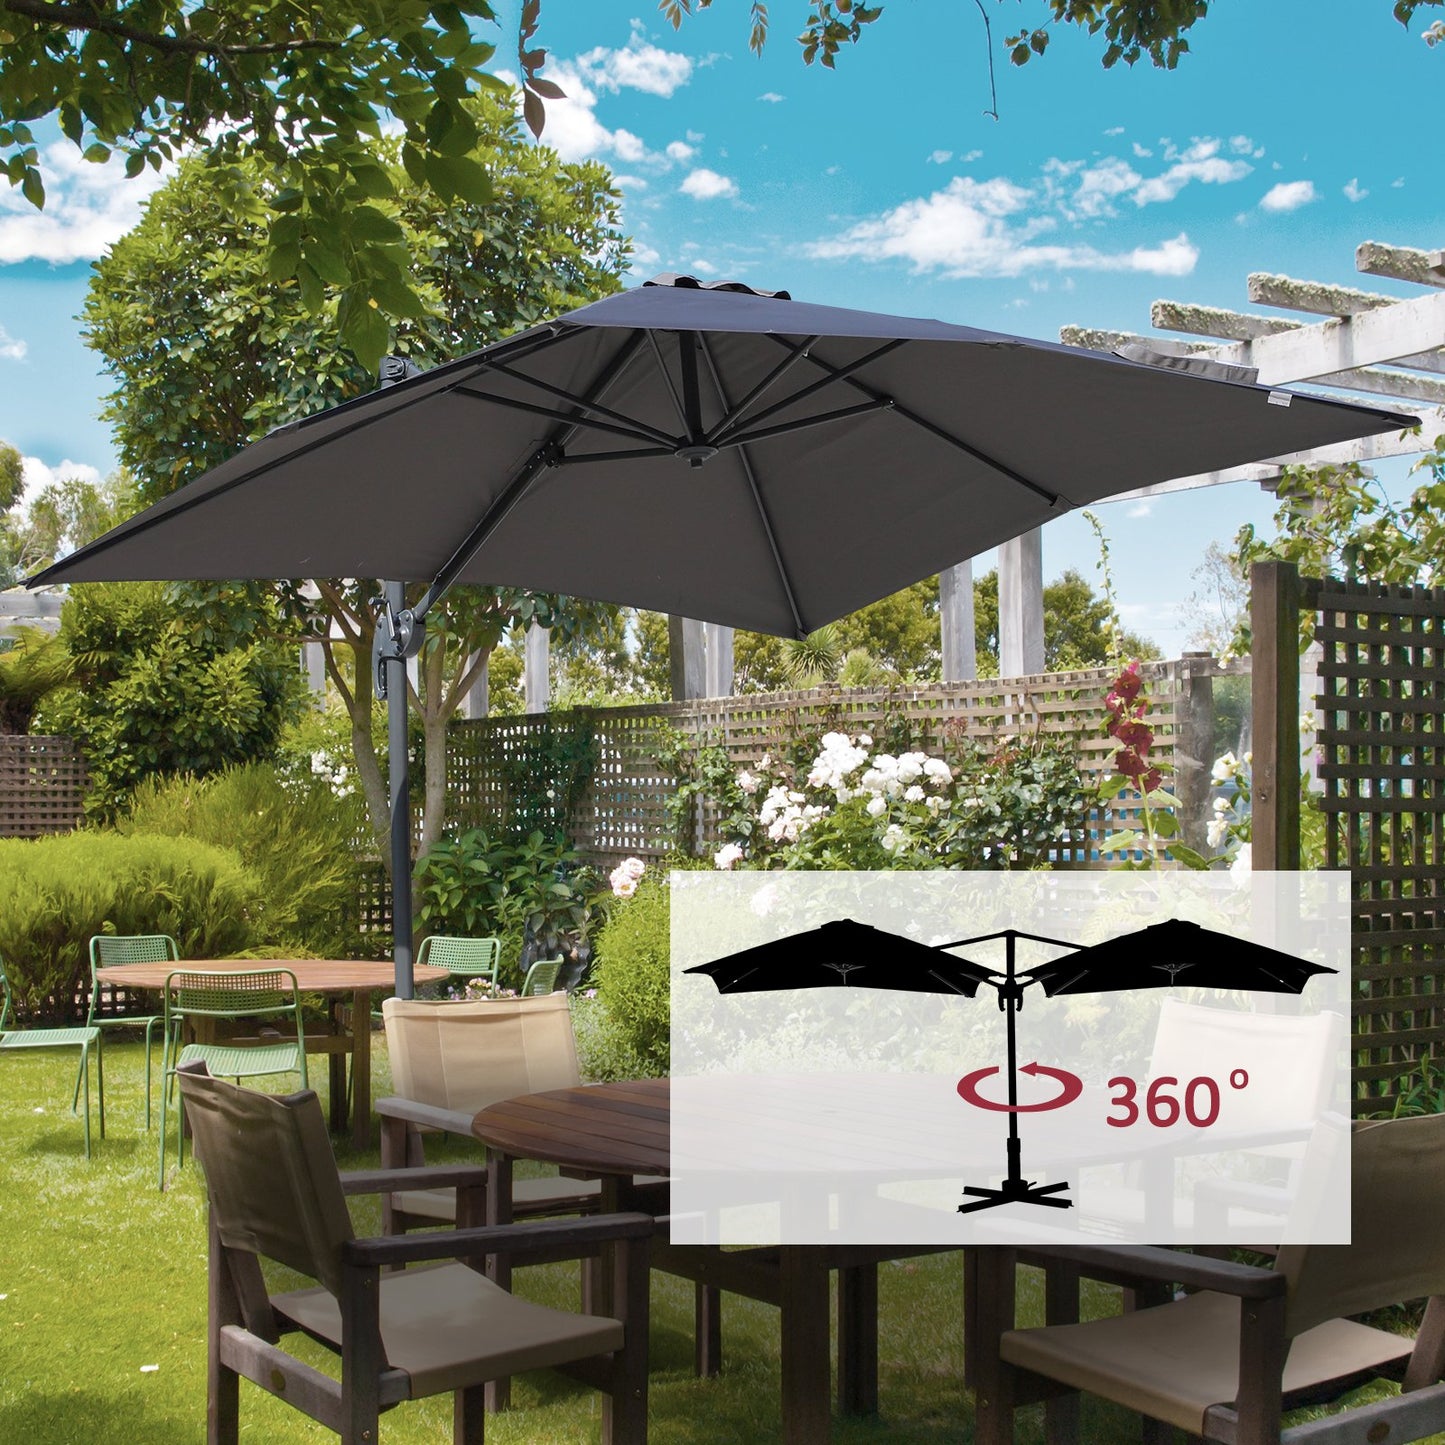 Outsunny 2.5 x 2.5m Patio Offset Parasol Umbrella Cantilever Hanging Aluminium Sun Shade Canopy Shelter 360° Rotation with Crank Handle and Cross Base, Grey